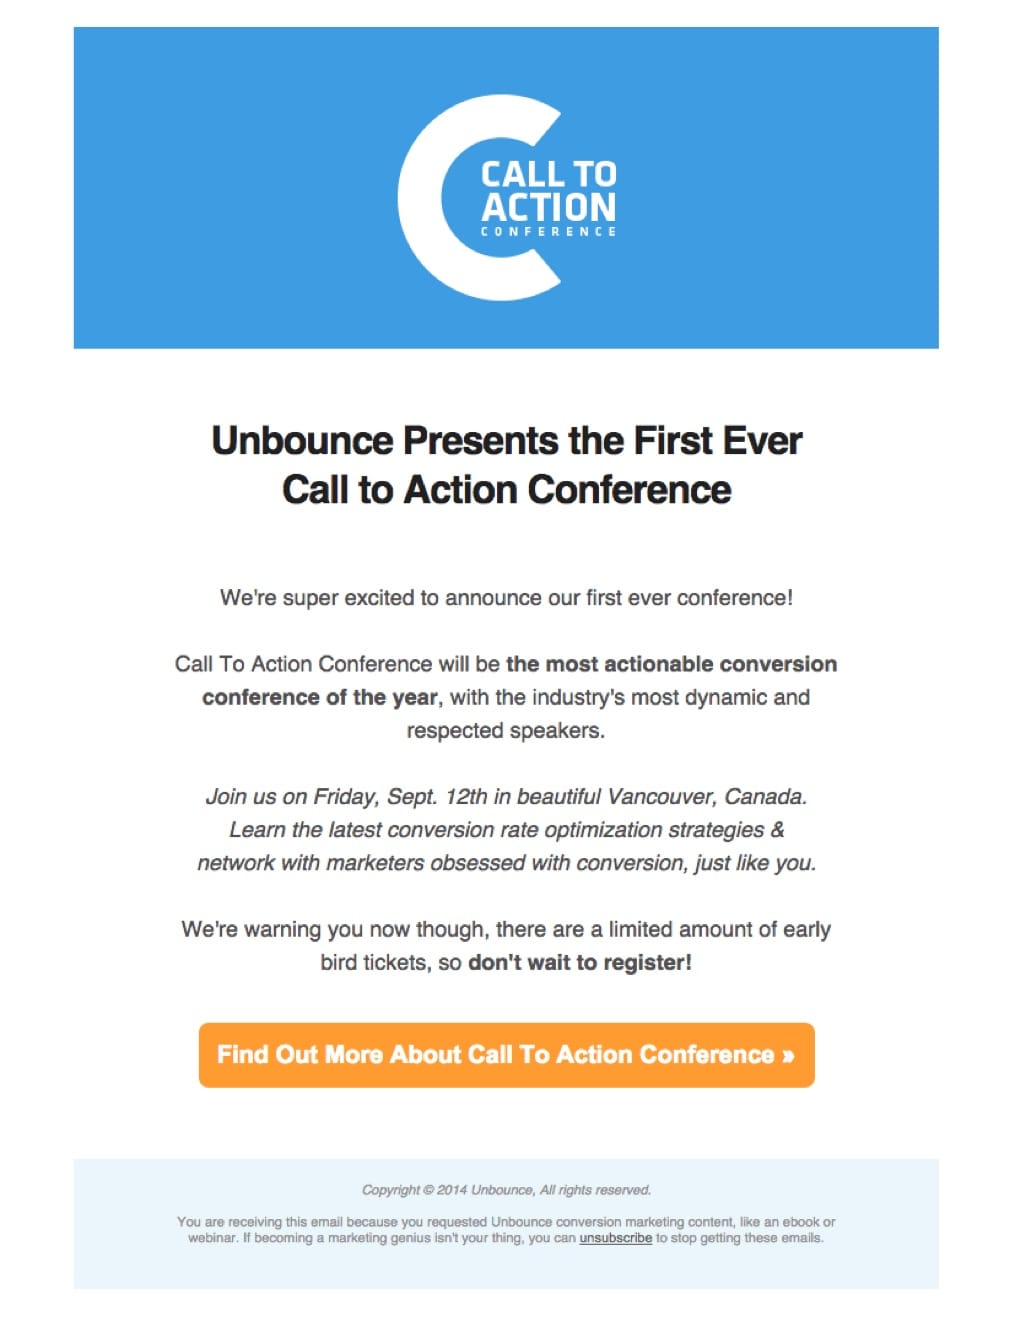 promotional email example unbounce (event announcement)